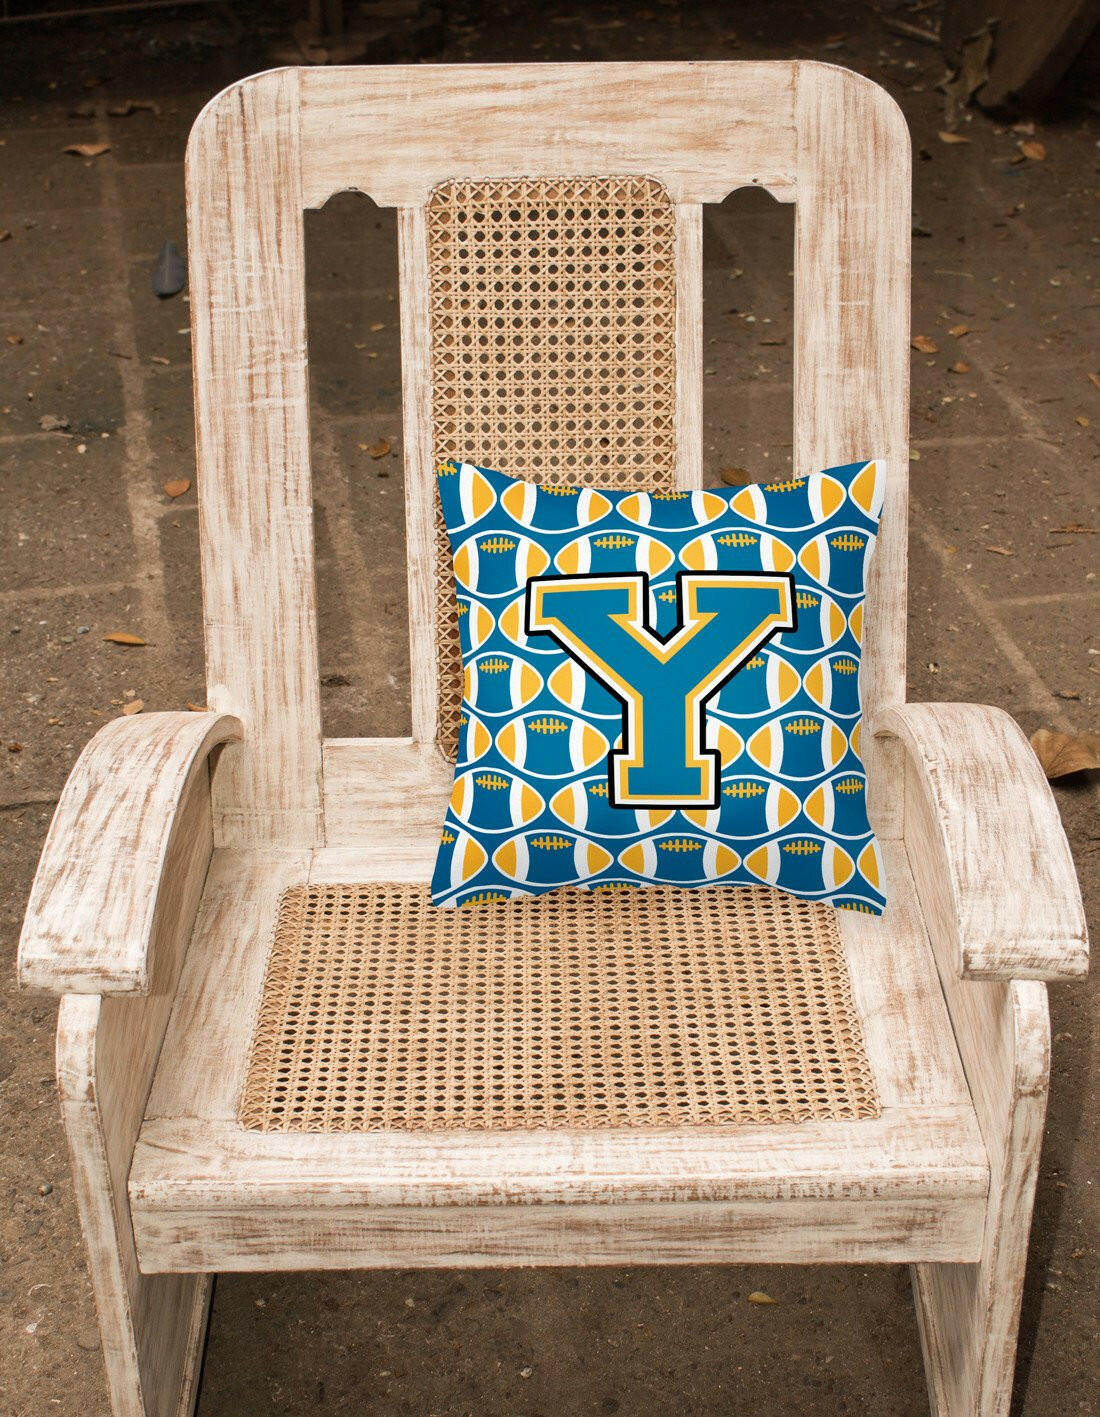 Letter Y Football Blue and Gold Fabric Decorative Pillow CJ1077-YPW1414 by Caroline's Treasures